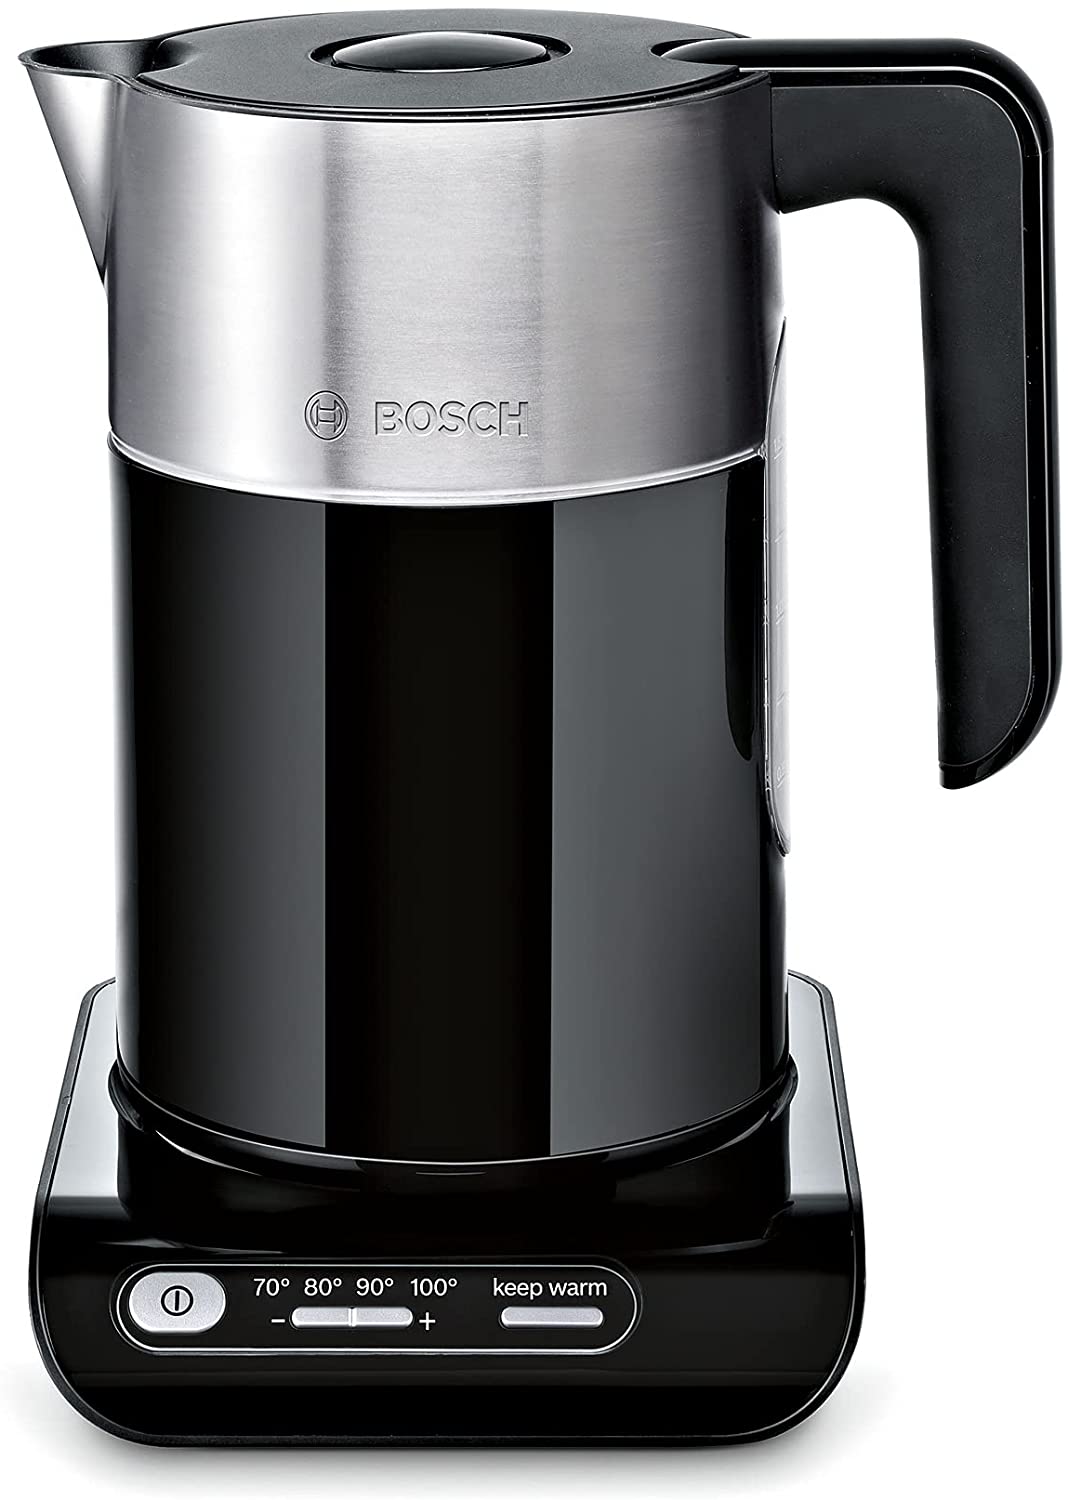 Bosch Kettle With Stainless Steel, 1.5 L, 2400W (Black)